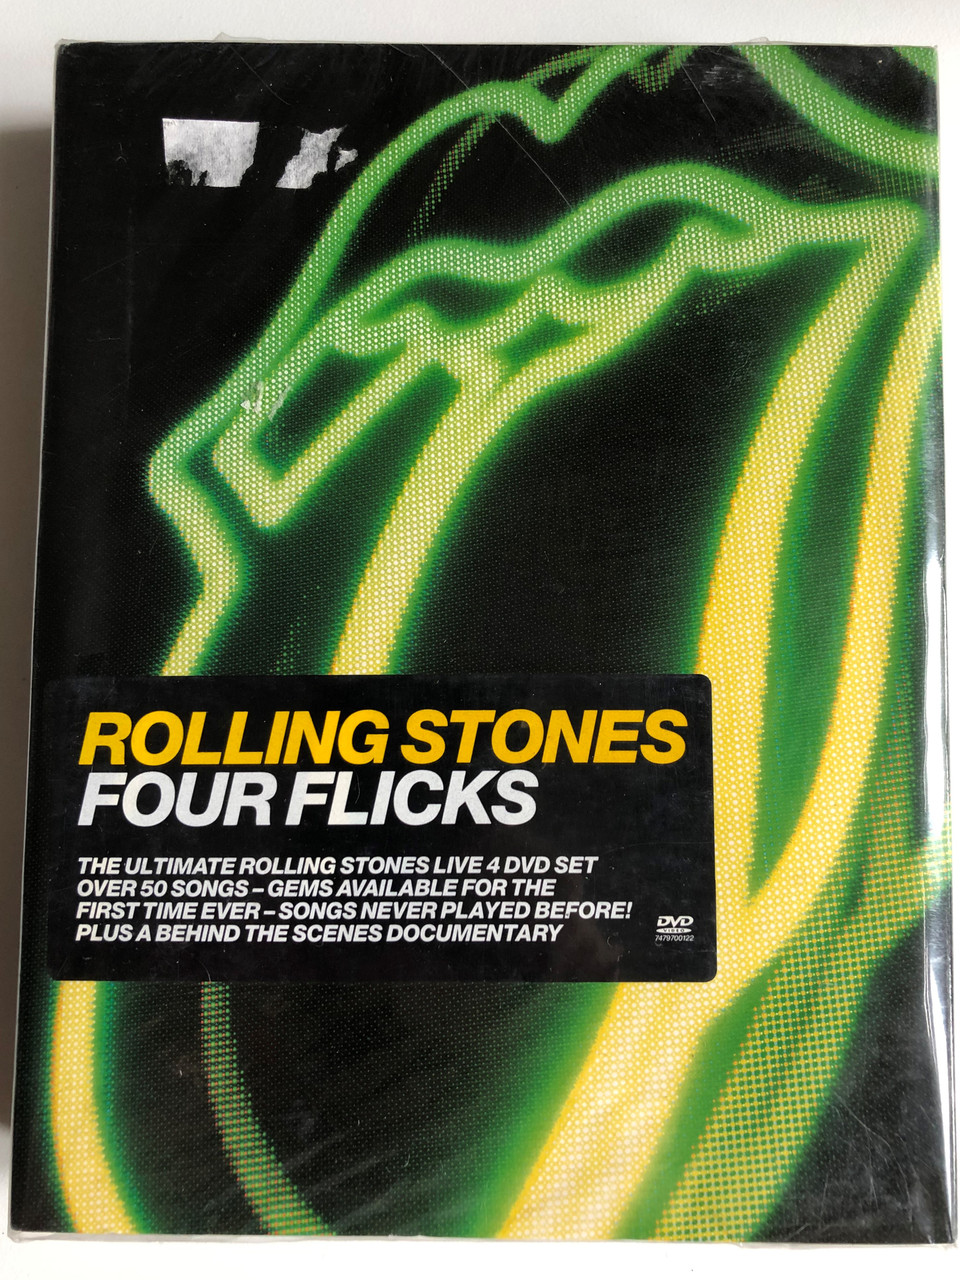 https://cdn10.bigcommerce.com/s-62bdpkt7pb/products/0/images/255902/Rolling_Stones_Four_Flicks_The_Ultimate_Rolling_Stones_Live_4_DVD_Set_Over_50_Songs_-_Gems_Available_For_The_First_Time_Ever_-_Songs_Never_Played_Before_Plus_A_Behind_The_Scenes_Documenta_1__82246.1665497539.1280.1280.JPG?c=2&_gl=1*dic02k*_ga*MjA2NTIxMjE2MC4xNTkwNTEyNTMy*_ga_WS2VZYPC6G*MTY2NTQ5NDYwOS41ODkuMS4xNjY1NDk3NTIzLjYwLjAuMA..